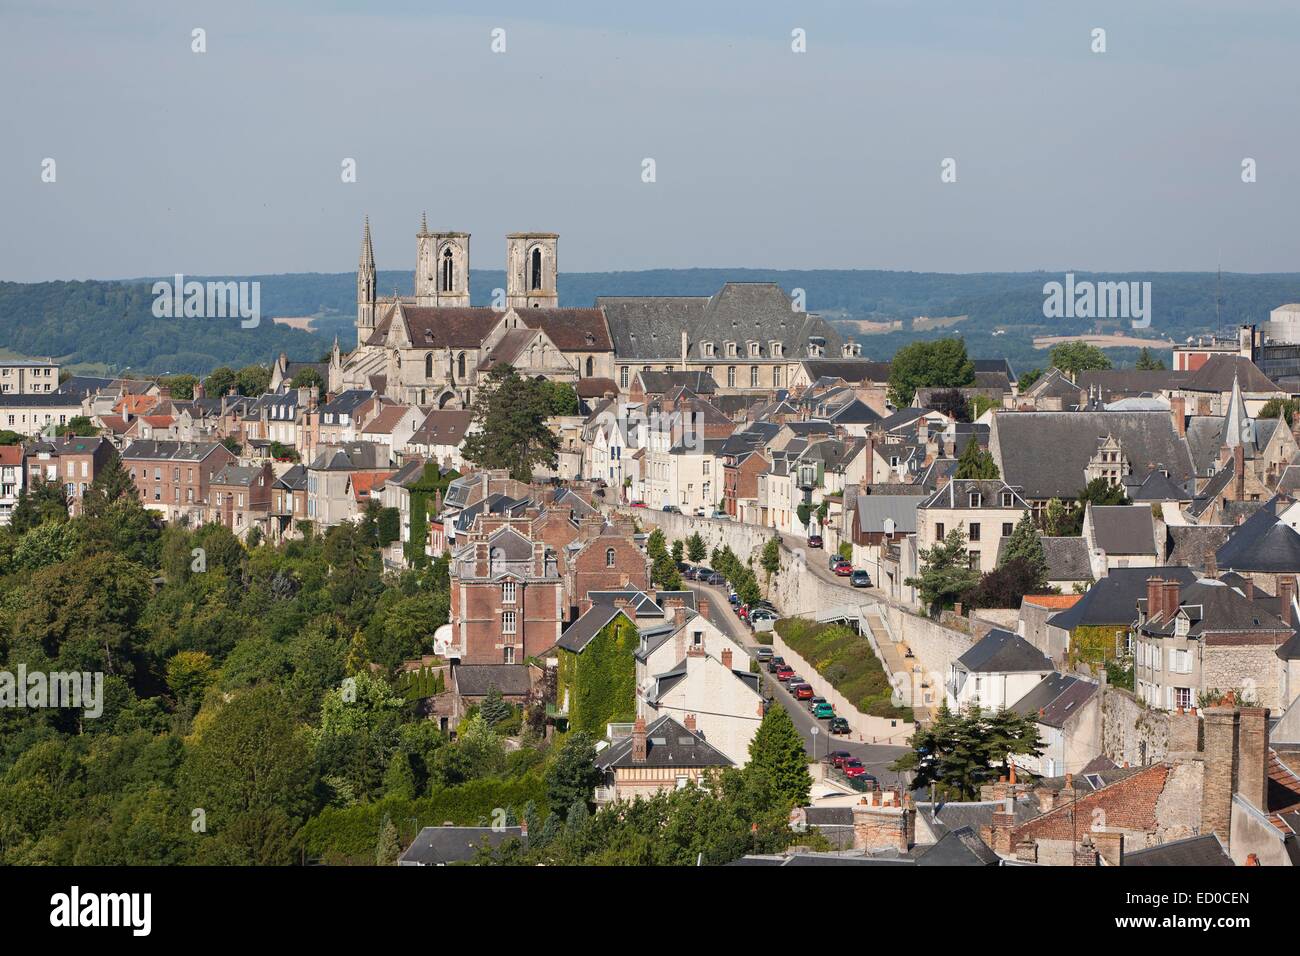 France, Aisne, Laon, view on the town and the St Martin church from the top of the cathedral Stock Photo